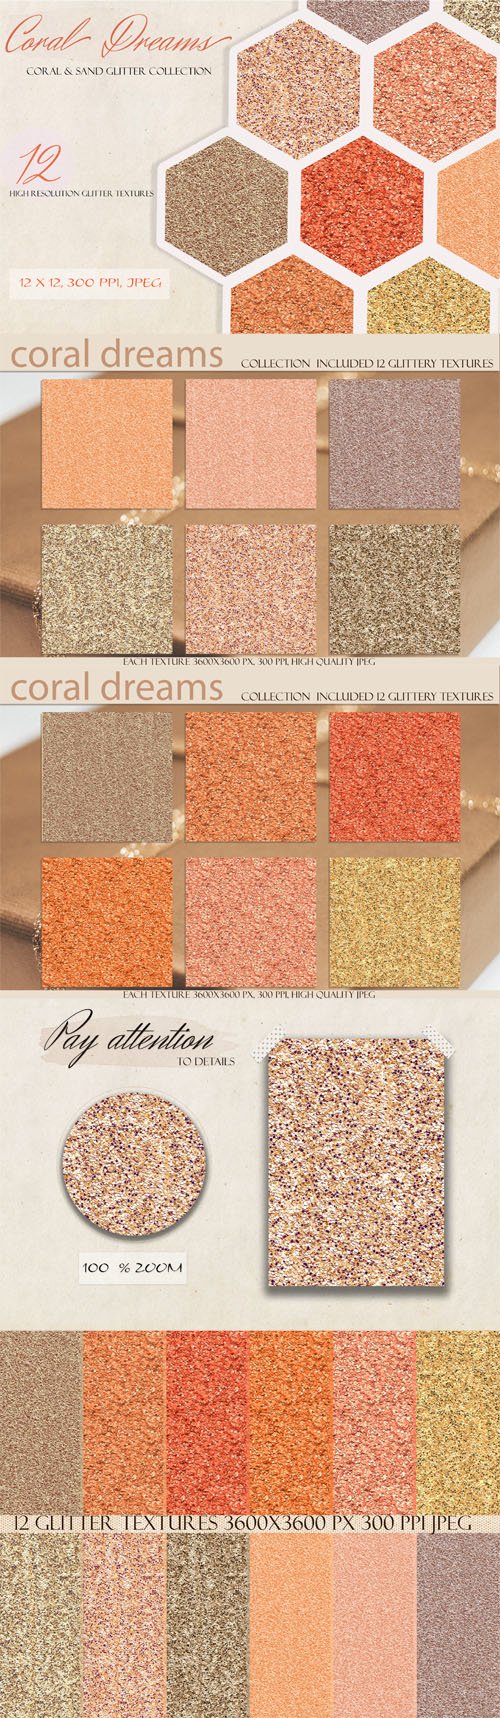 Coral Dreams - Coral & Sand Glitter Textures Collection